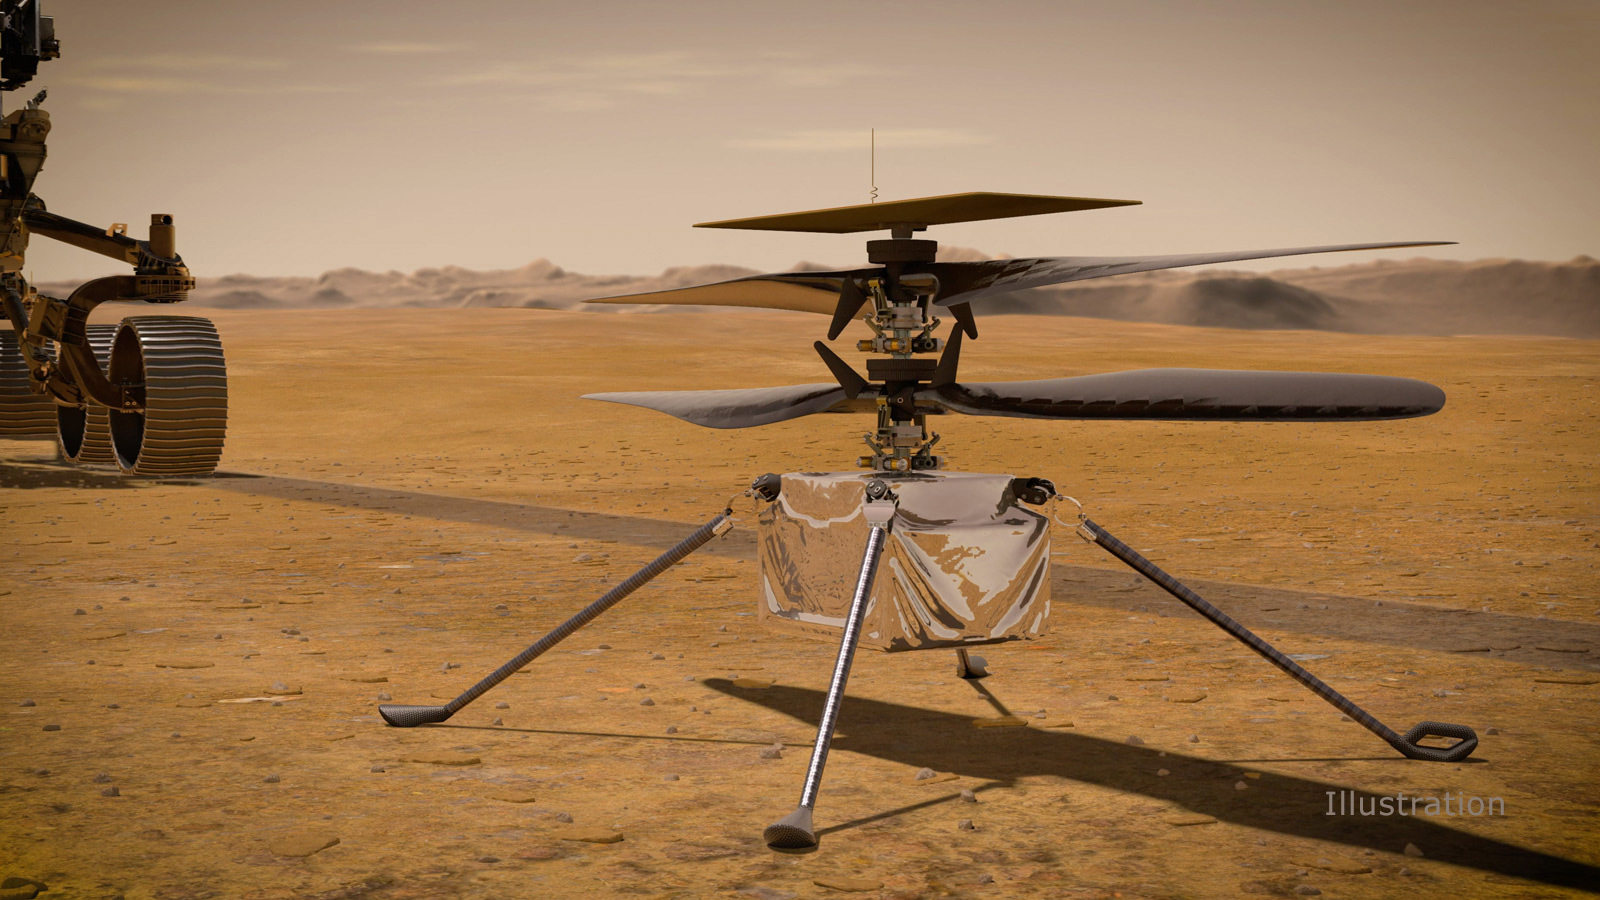 Ingenuity Mars Helicopter on the Martian Surface (Artist's Concept): In this illustration, NASA's Ingenuity Mars Helicopter stands on the Red Planet's surface as NASA's Perseverance rover (partially visible on the left) rolls away. Credits: NASA/JPL-Caltech. Full image and caption ›